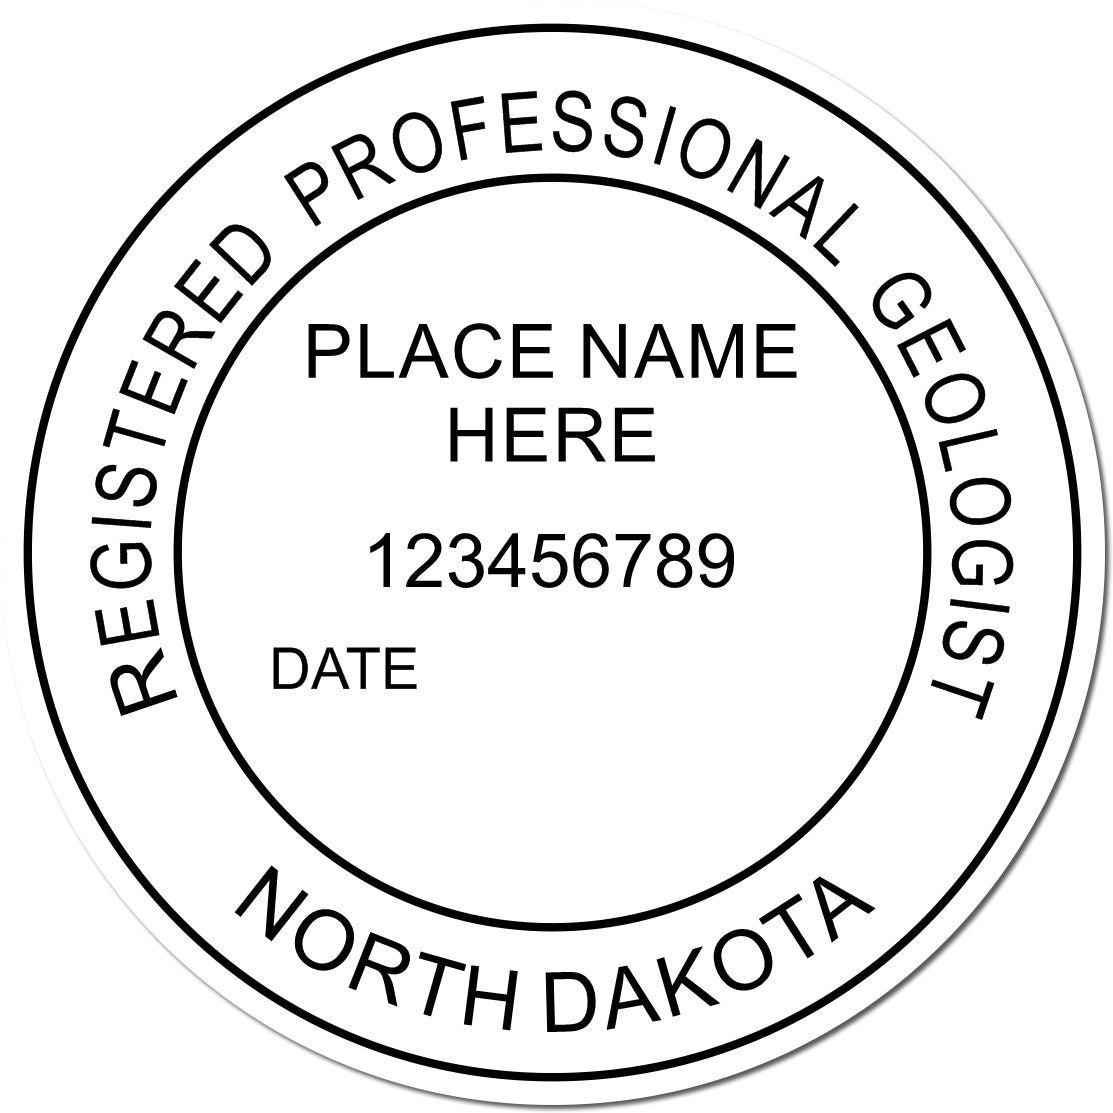 This paper is stamped with a sample imprint of the Digital North Dakota Geologist Stamp, Electronic Seal for North Dakota Geologist, signifying its quality and reliability.